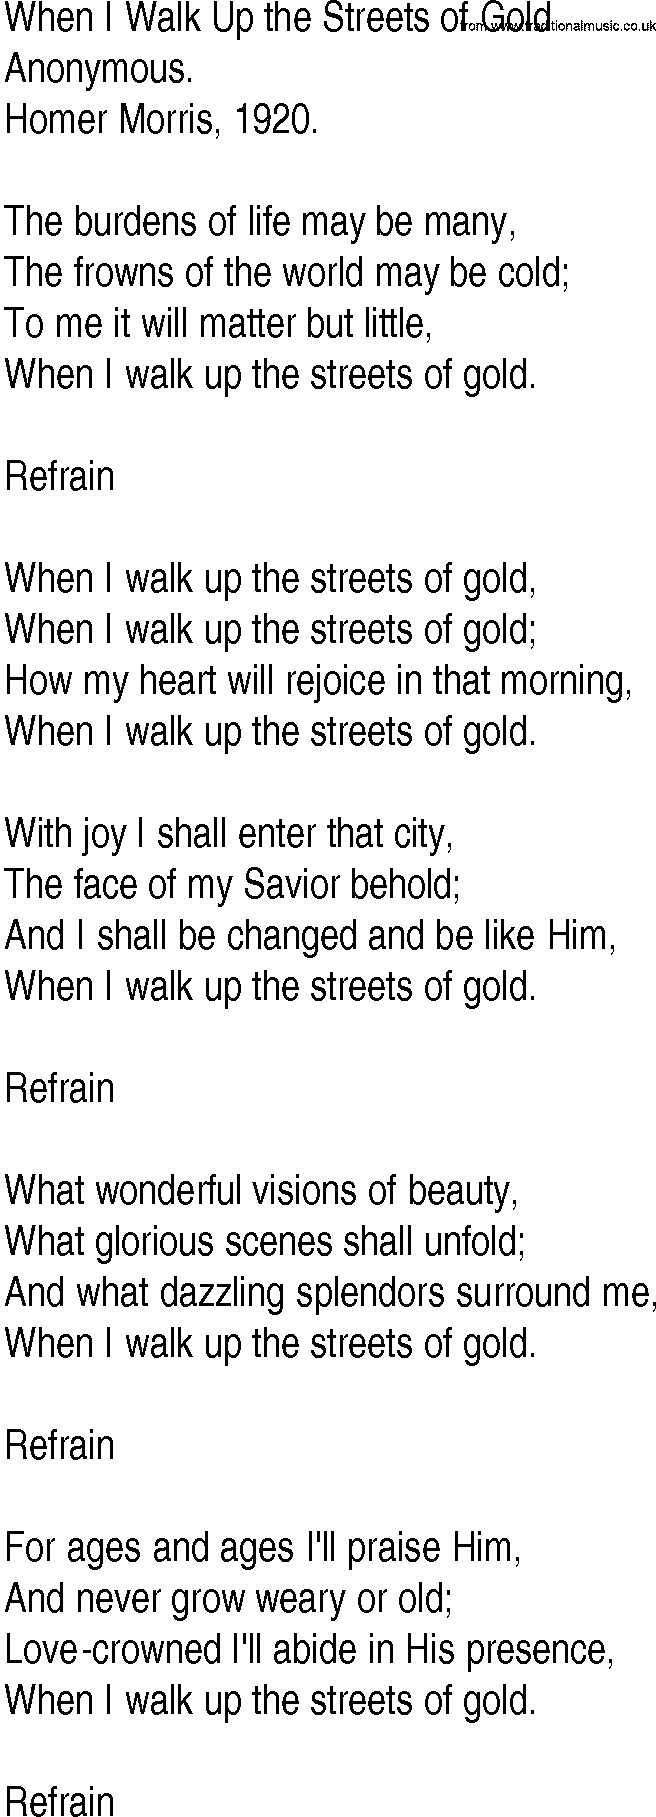 Hymn and Gospel Song: When I Walk Up the Streets of Gold by Anonymous lyrics